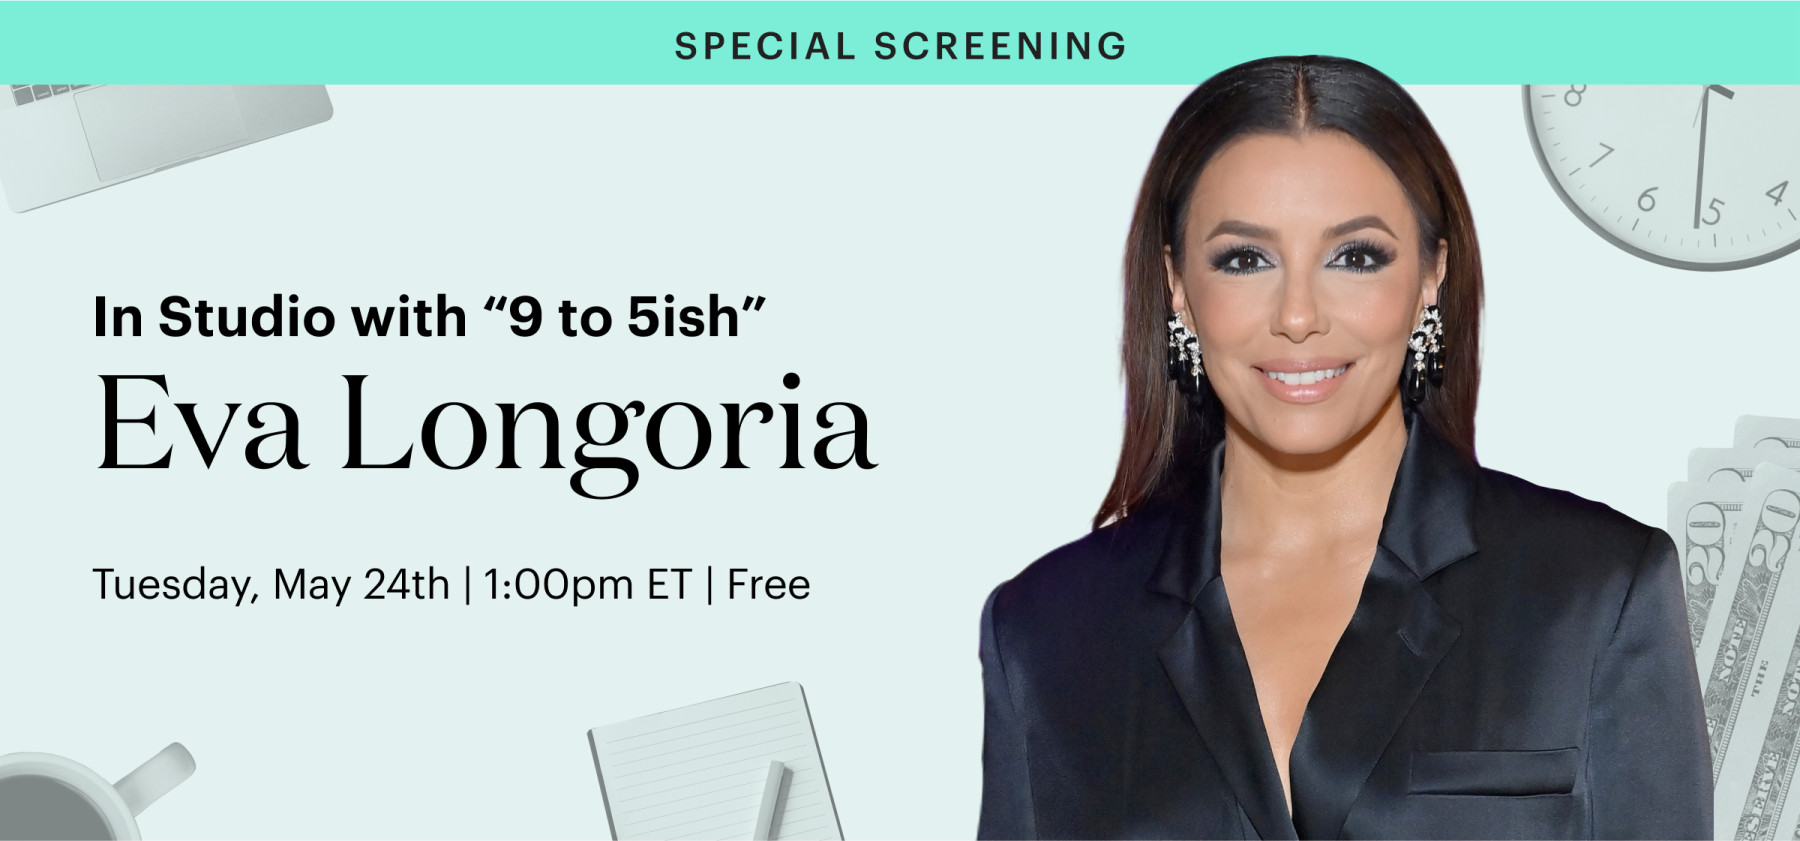 Special Screening In Studio with "9 to 5ish" Eva Longoria Tuesday, May 24th 1pm ET Free